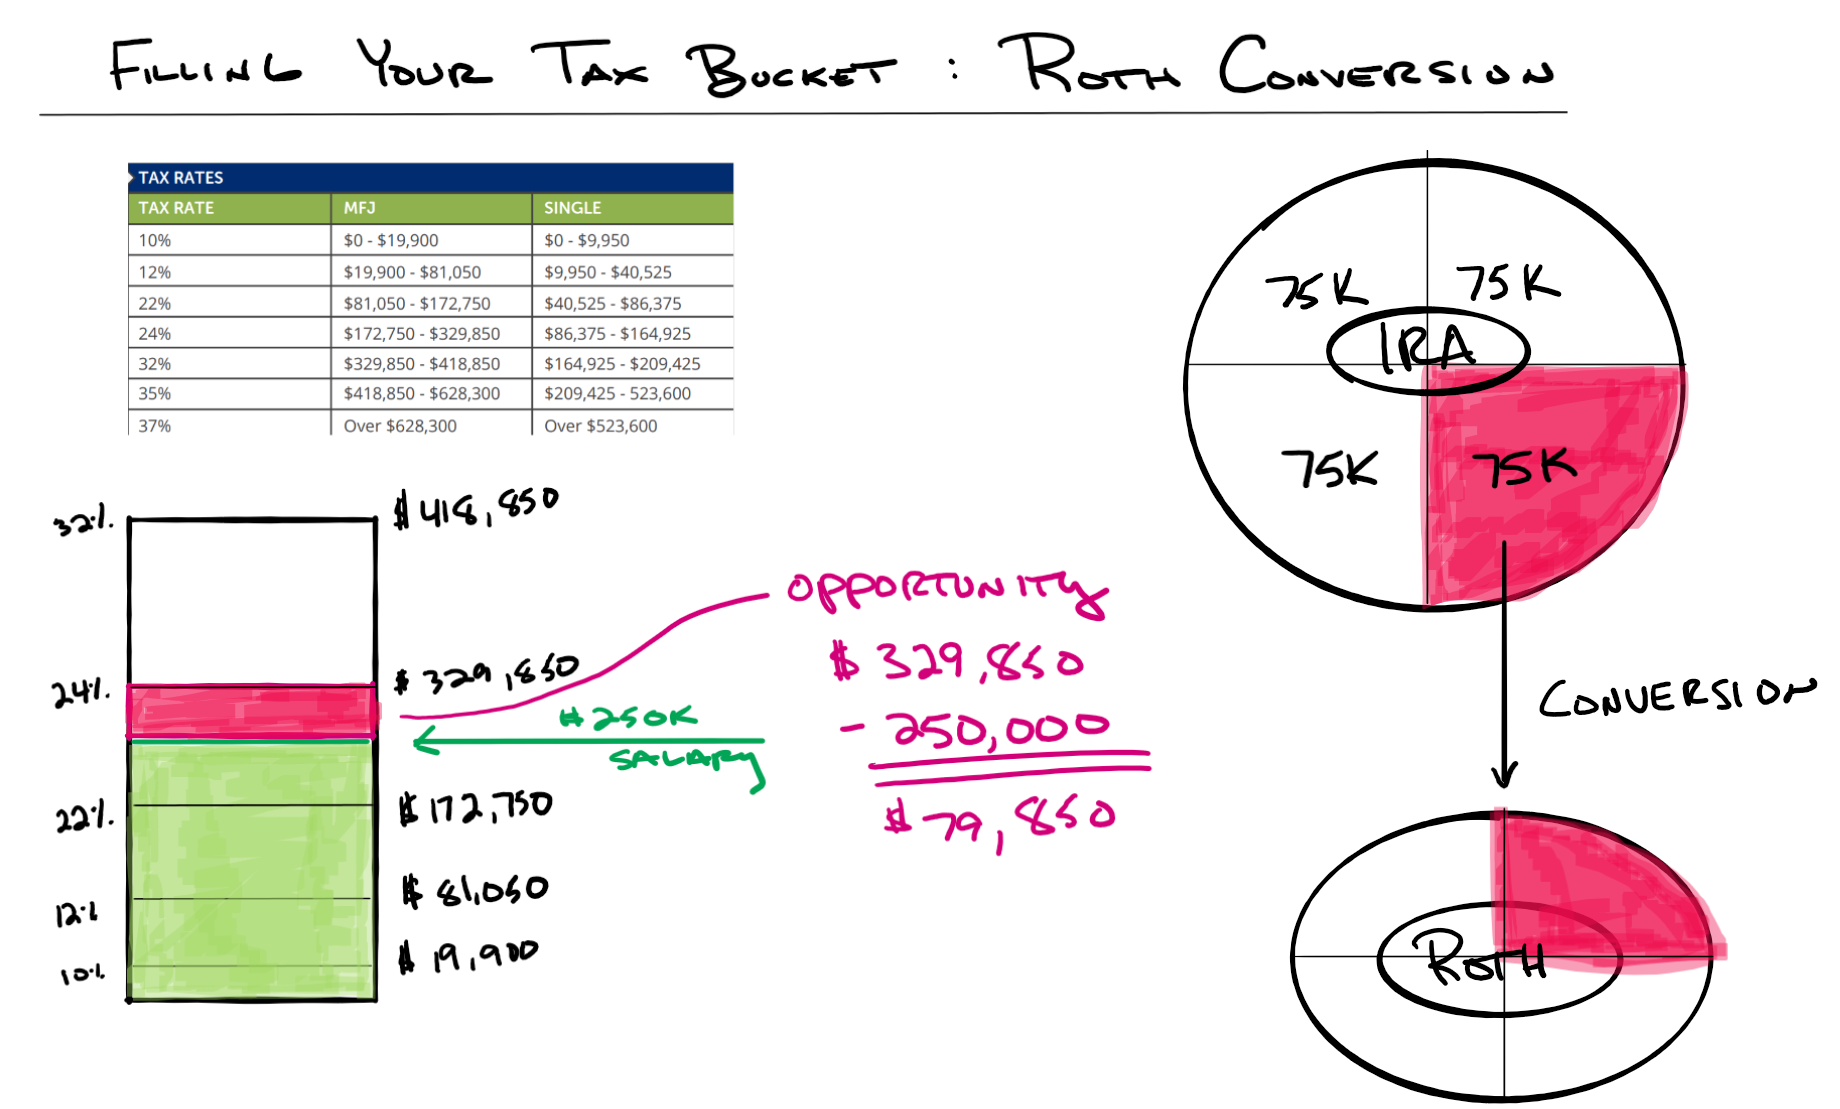 Are You Filling Your Tax Bucket With Roth Conversions